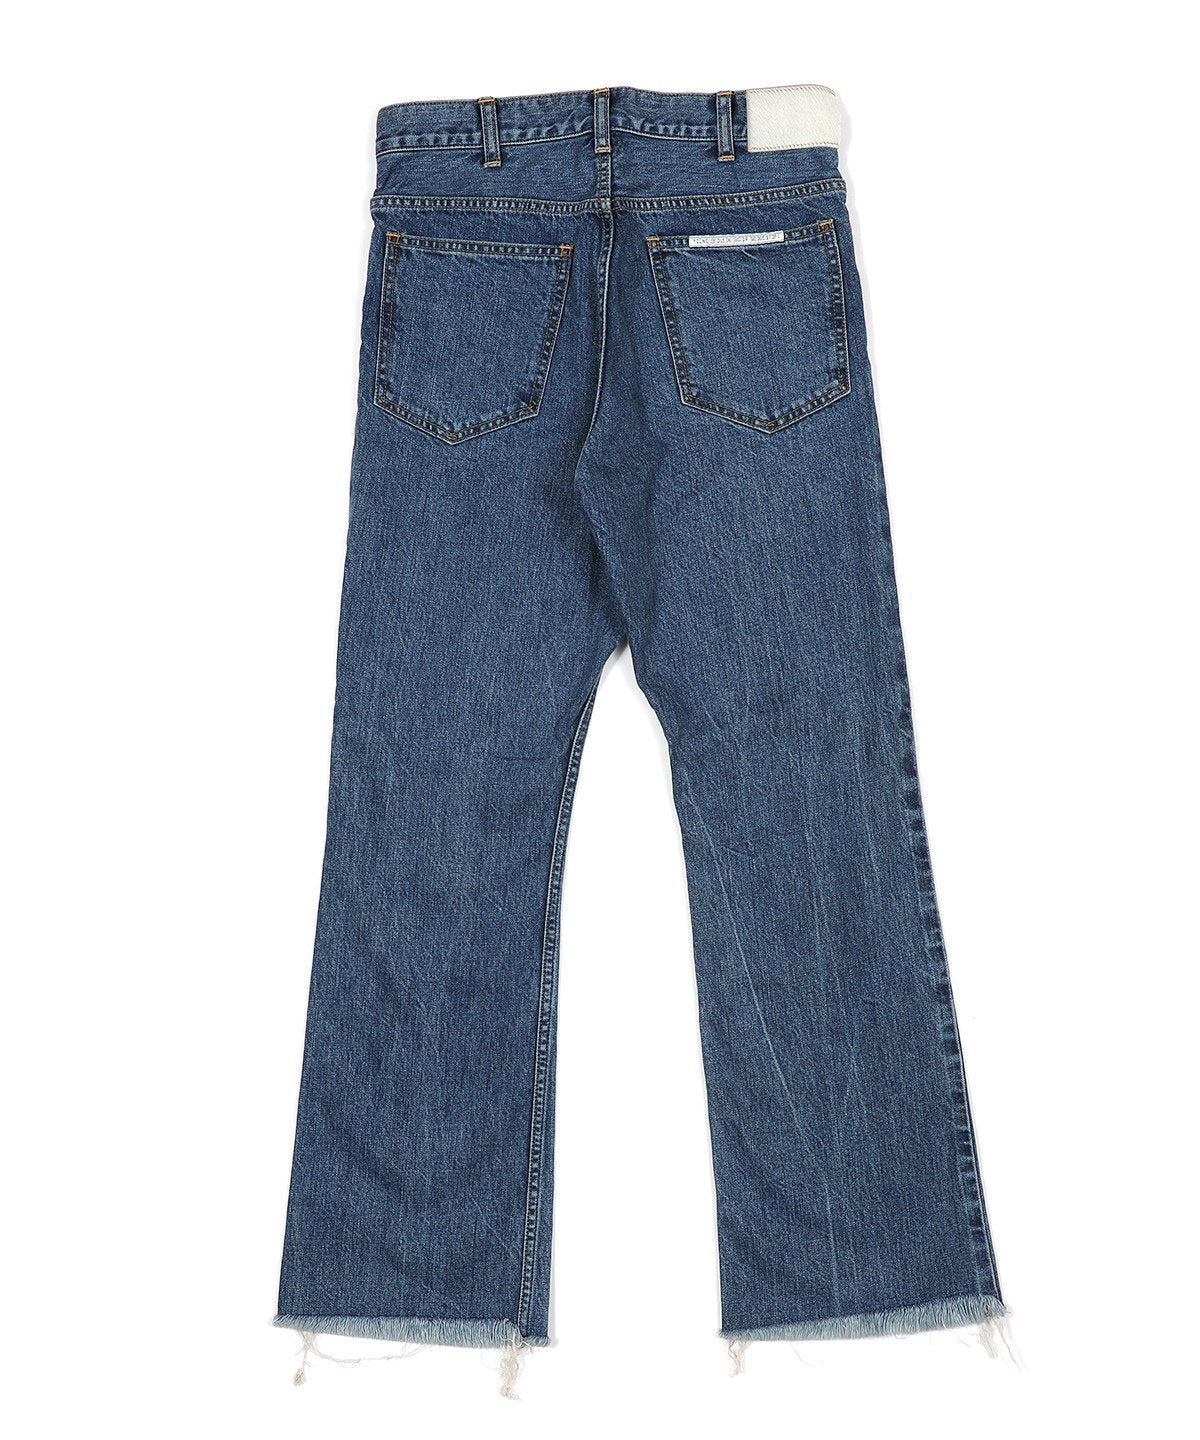 70'S HIP JEANS (WASHED OUT)